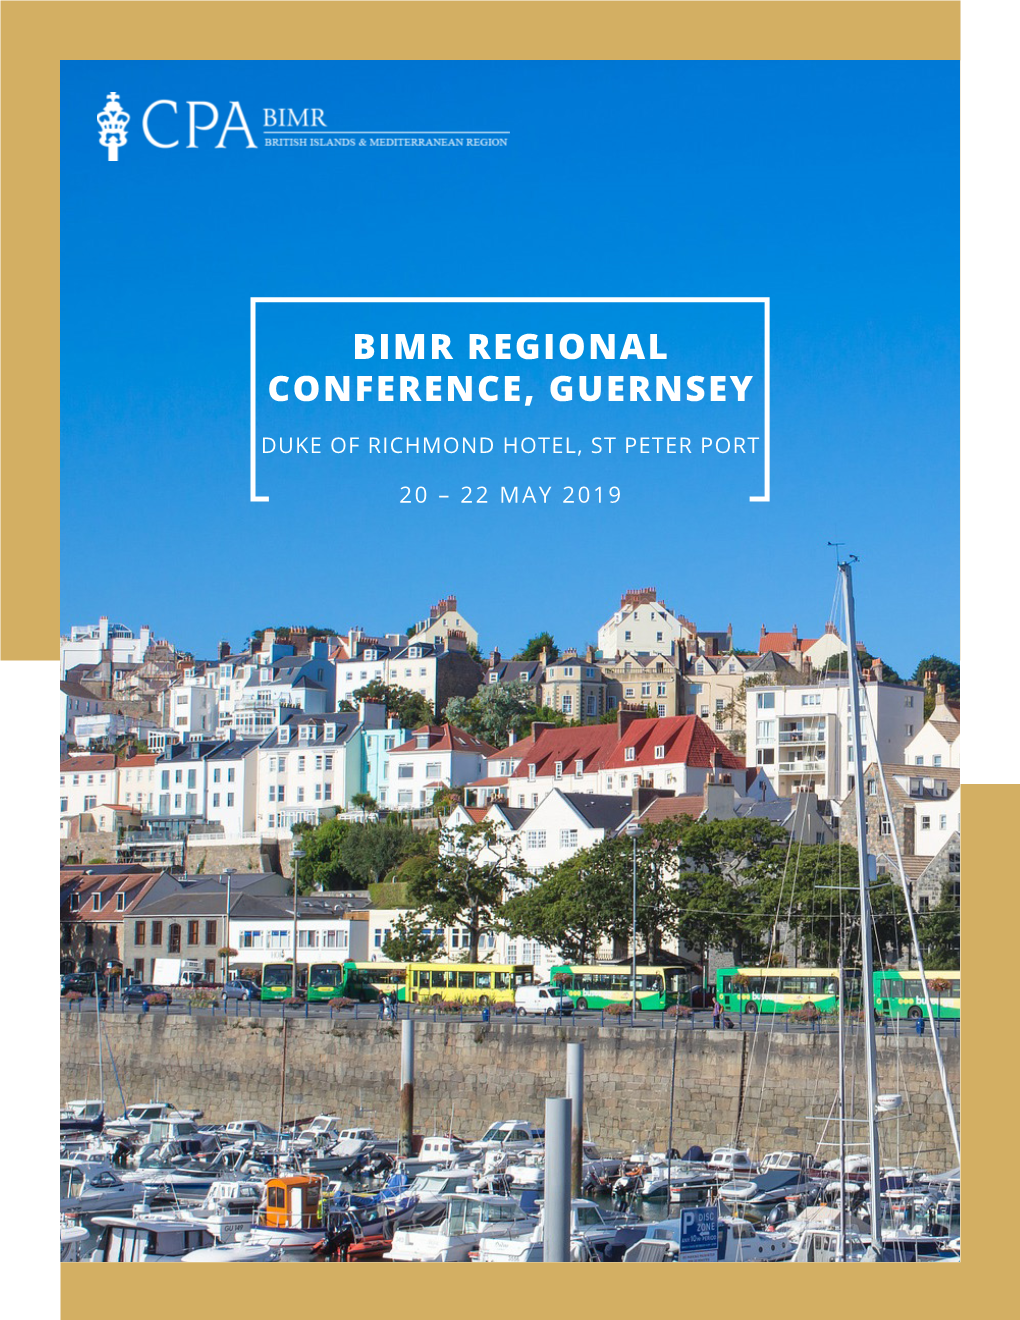 Bimr Regional Conference, Guernsey